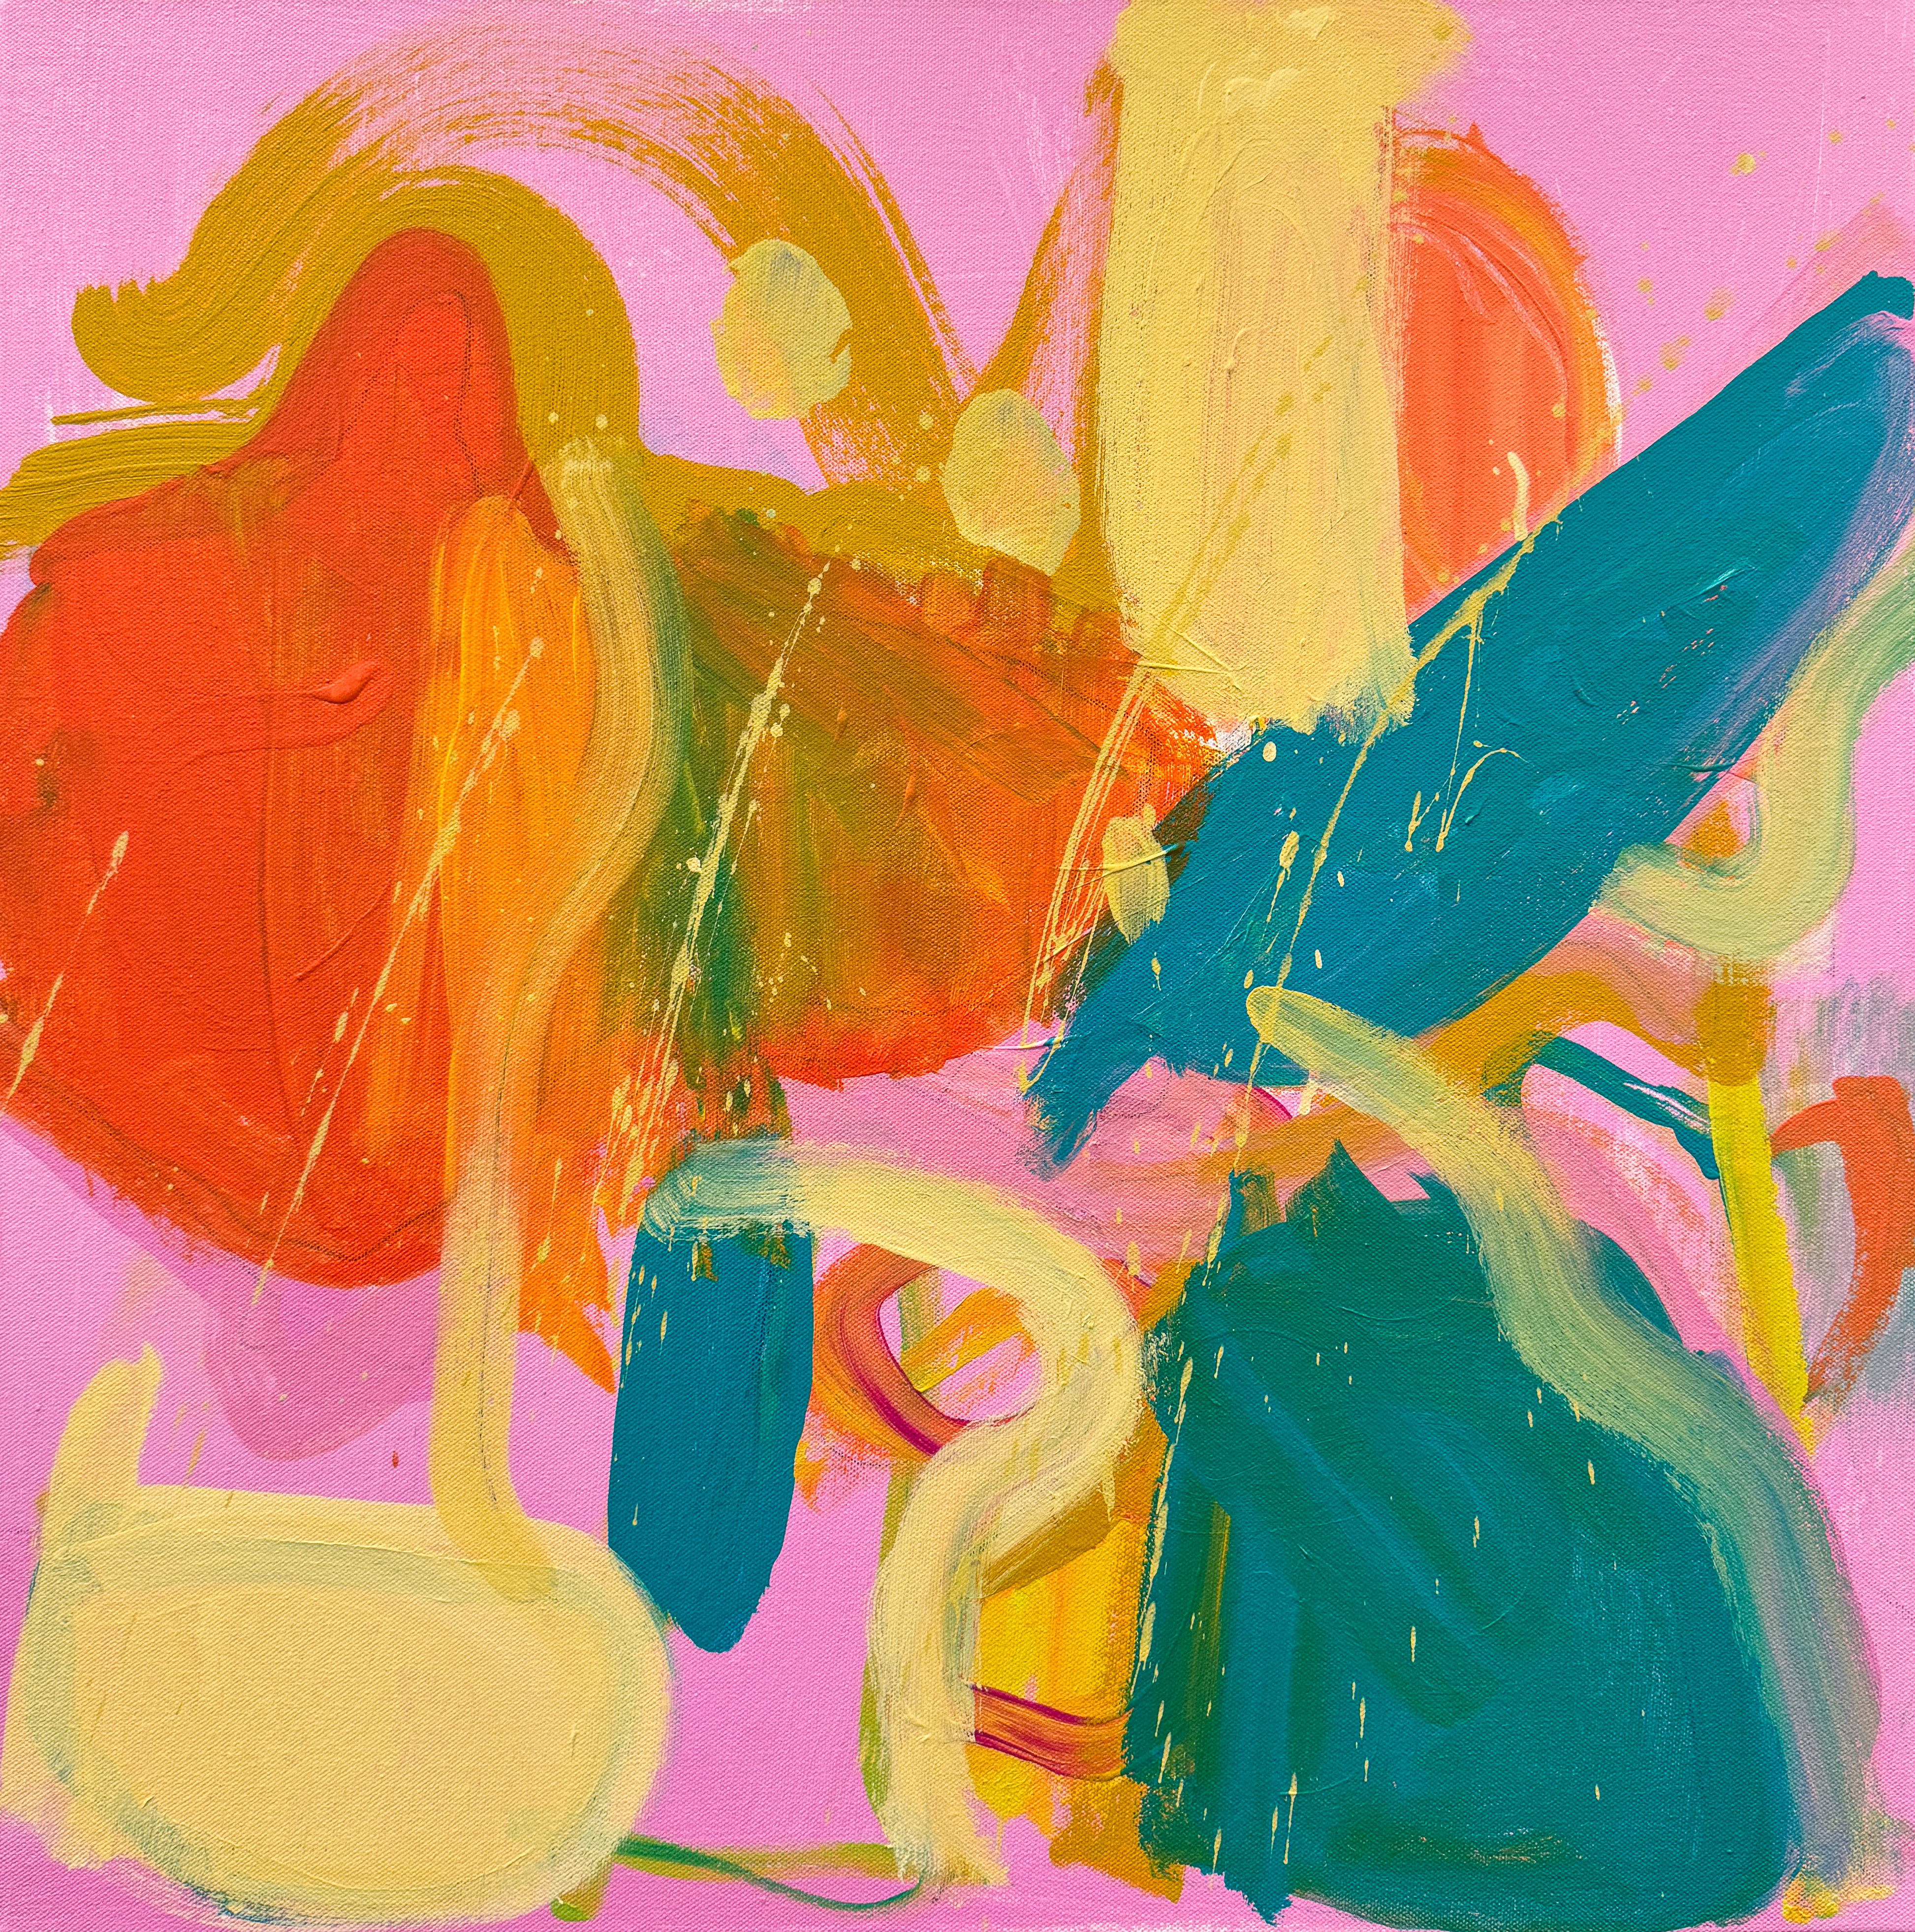 Abstract painting with colorful flower-like forms against a pink background